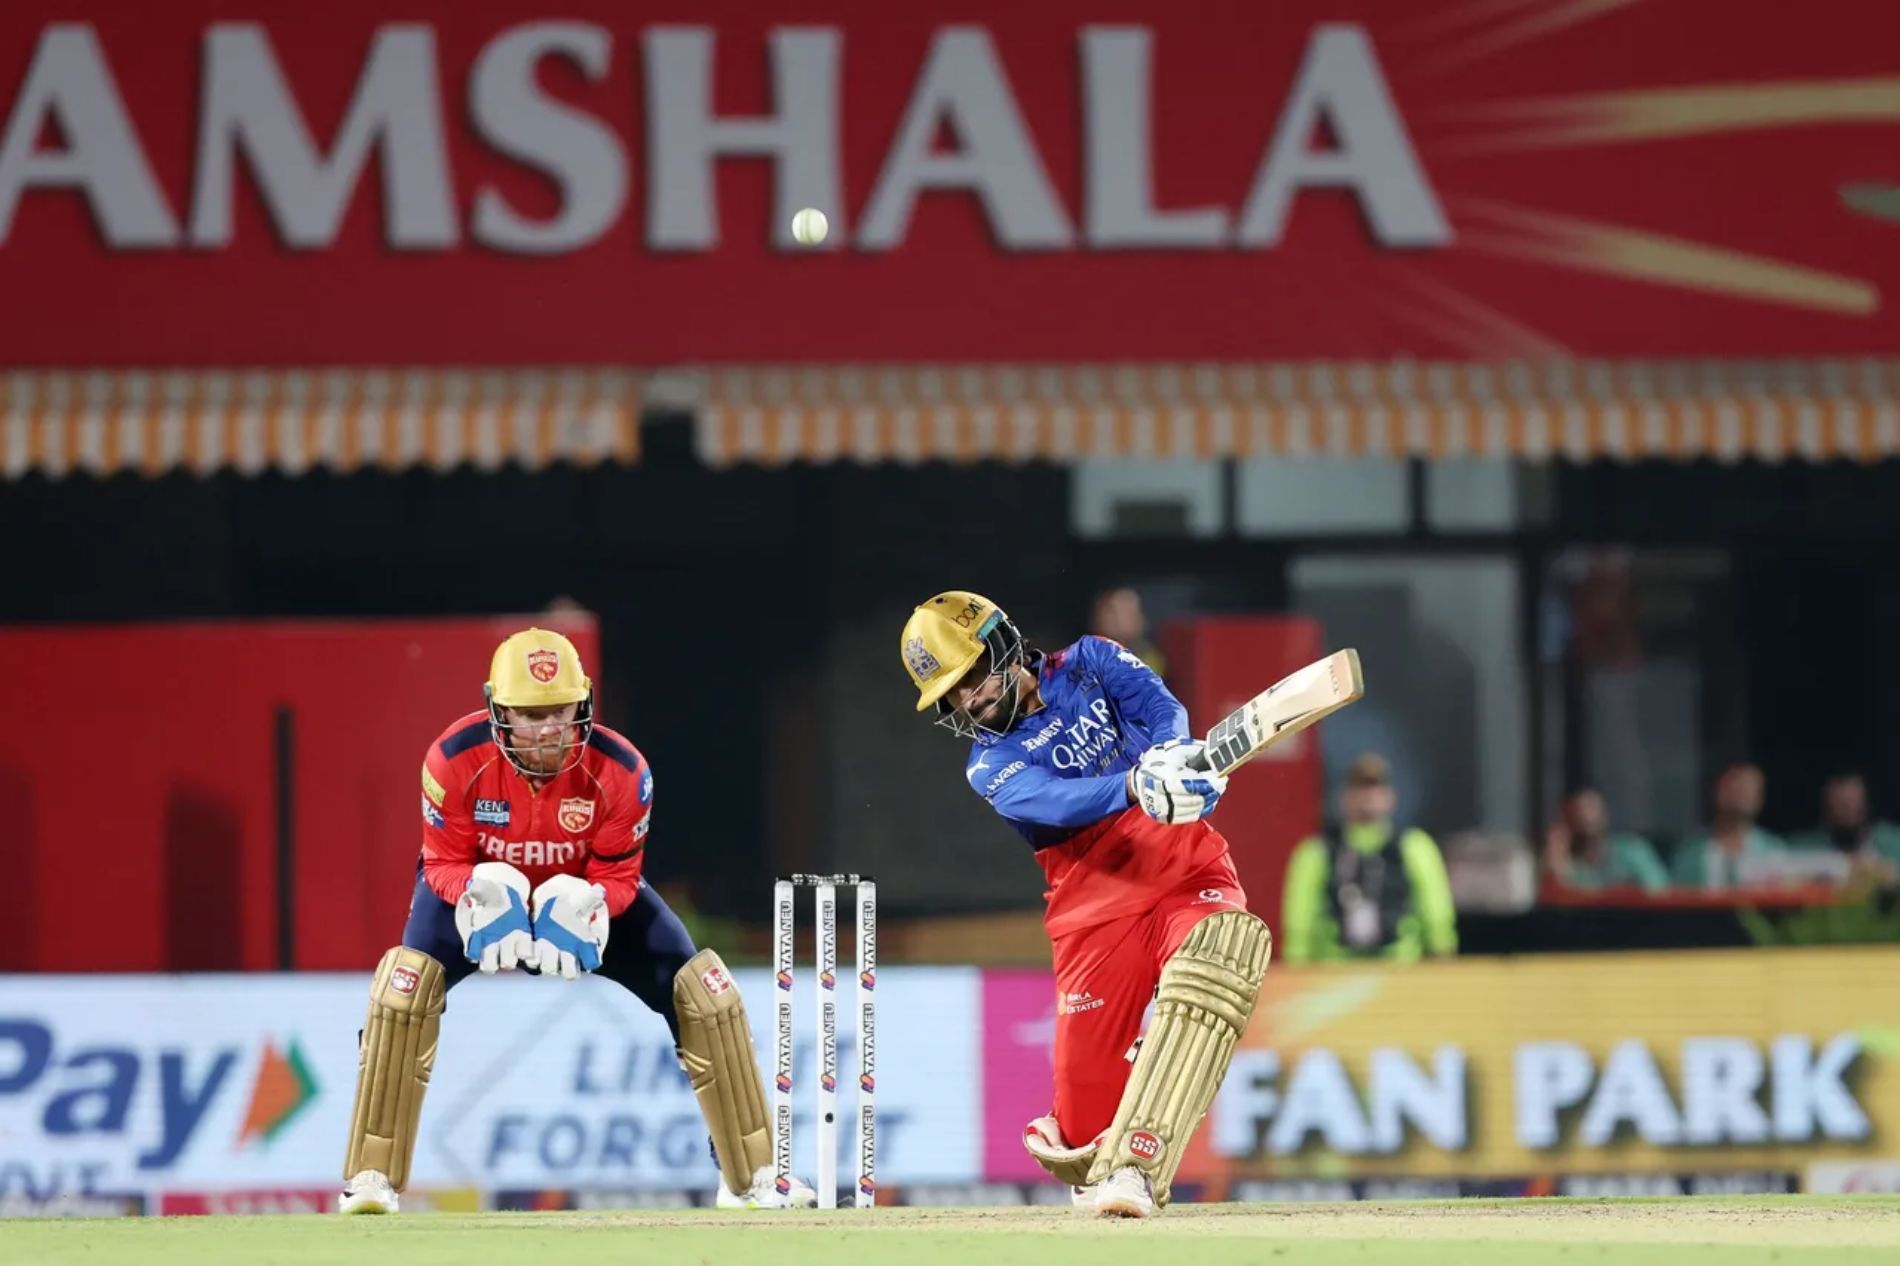 Rajat Patidar has been in fantastic form with the willow. (Pic: BCCI/ iplt20.com)